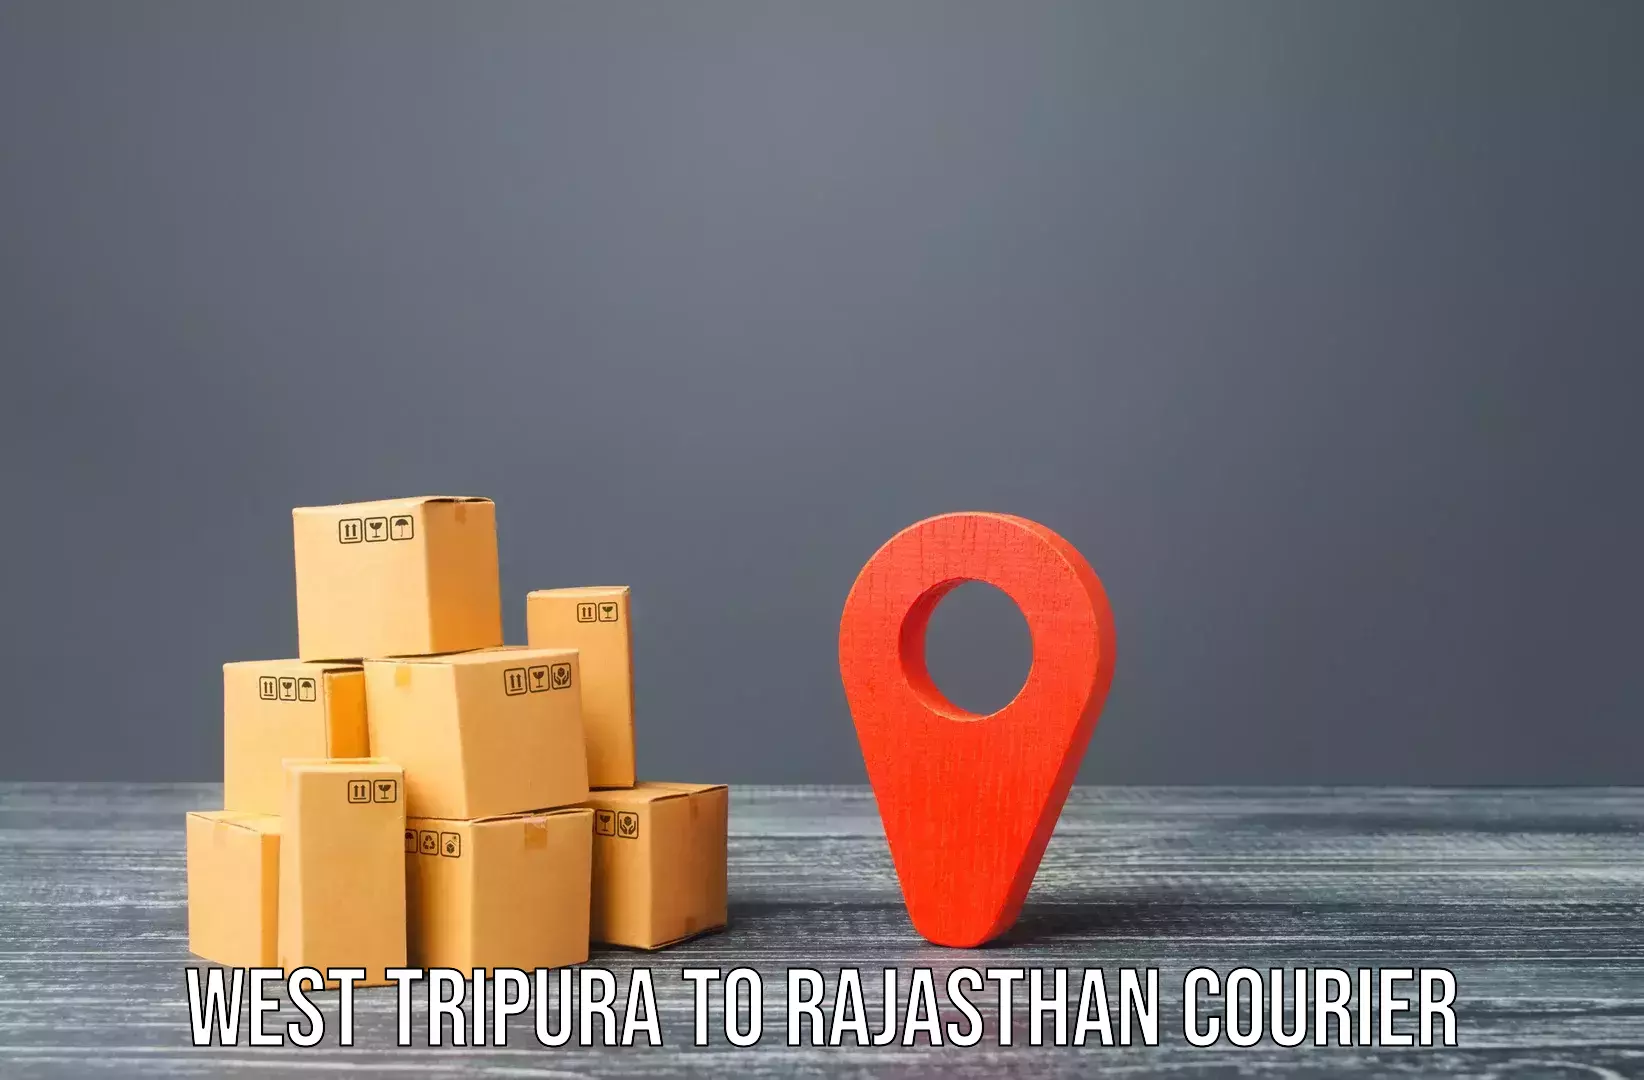 Household goods transport service in West Tripura to Udaipur